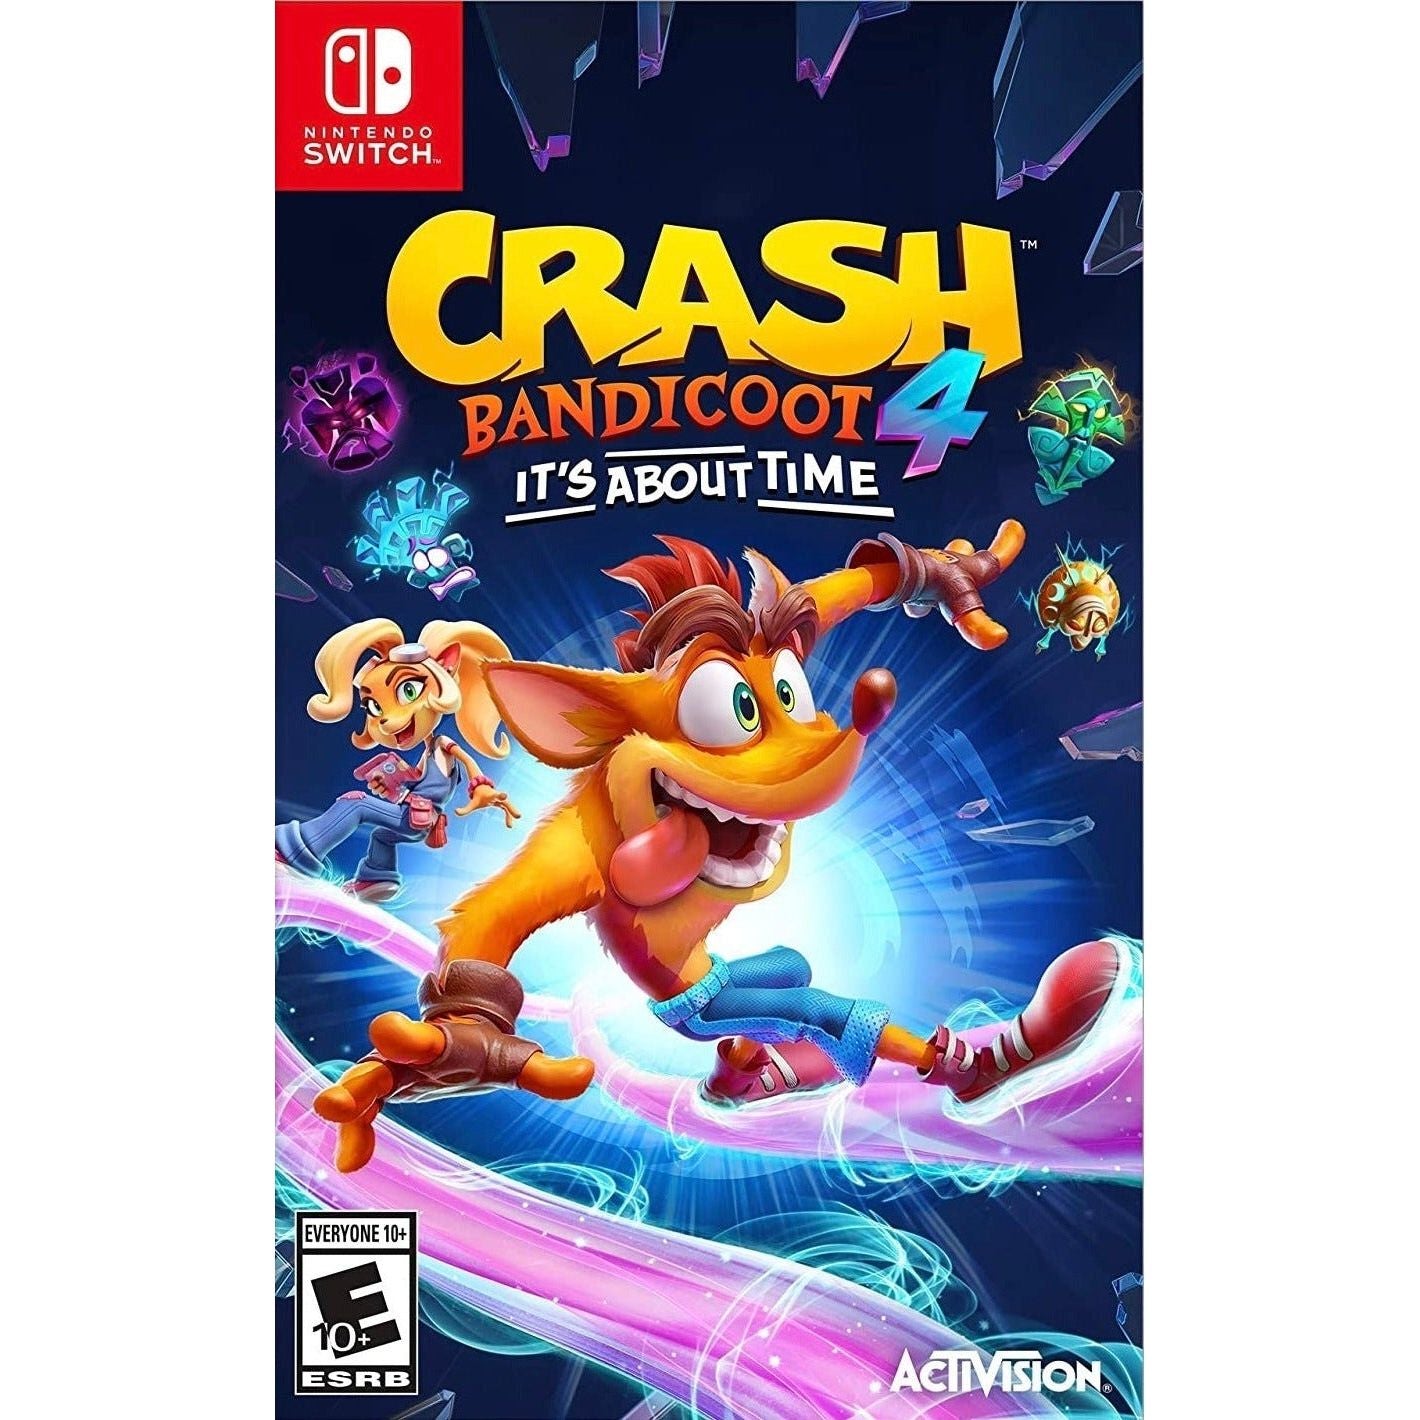 Switch - Crash Bandicoot 4 It's About Time